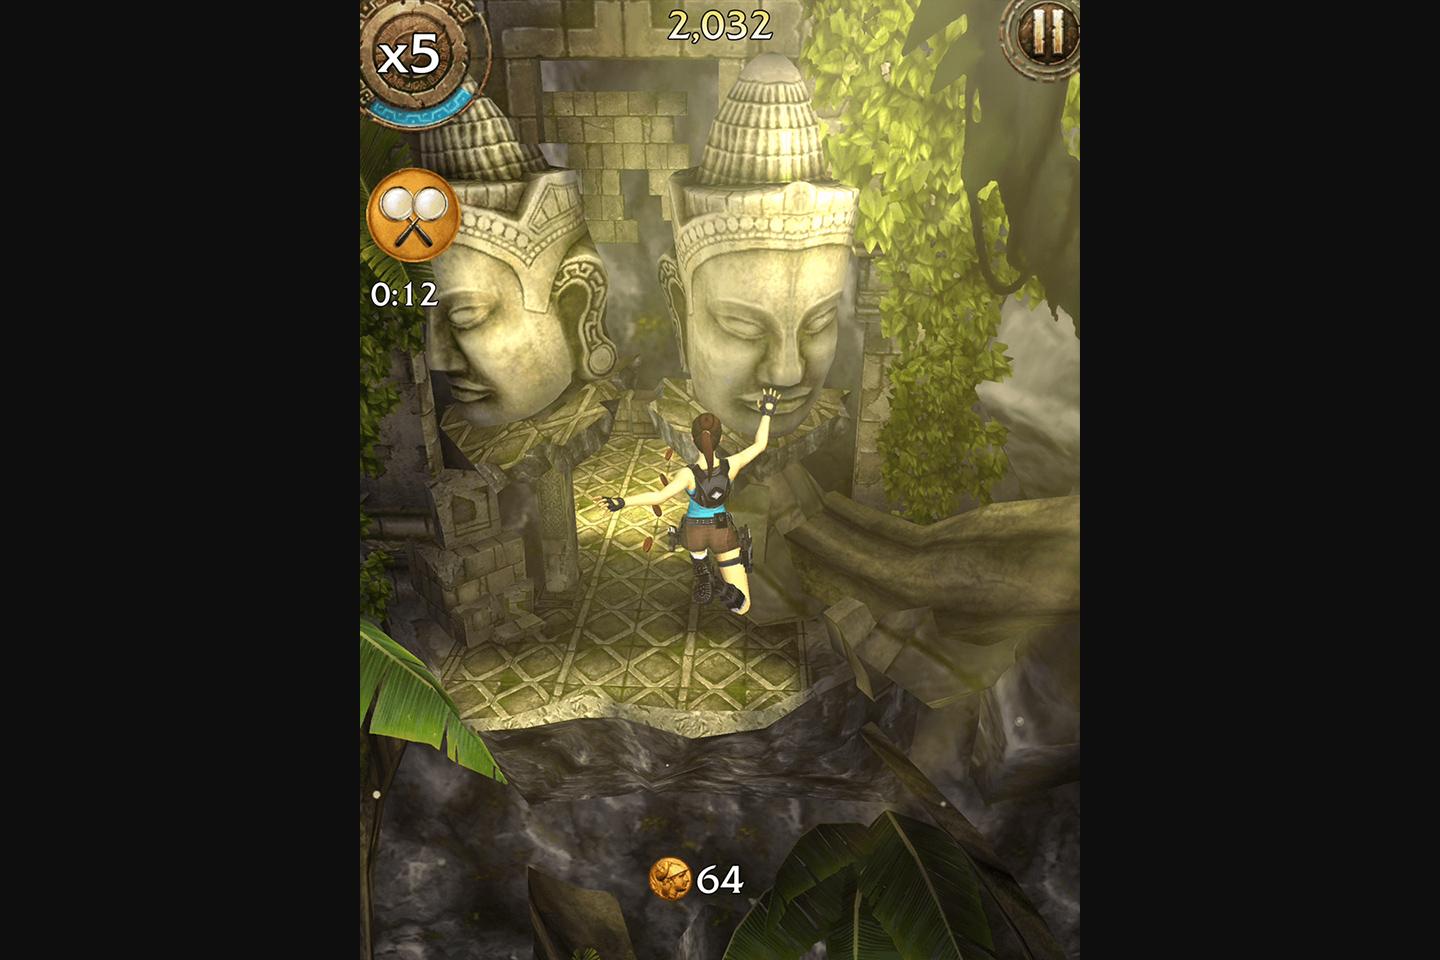 Lara Croft swinging from a rope in a jungle setting with ancient stone faces in the background, in a mobile game scene emphasizing agility and adventure.